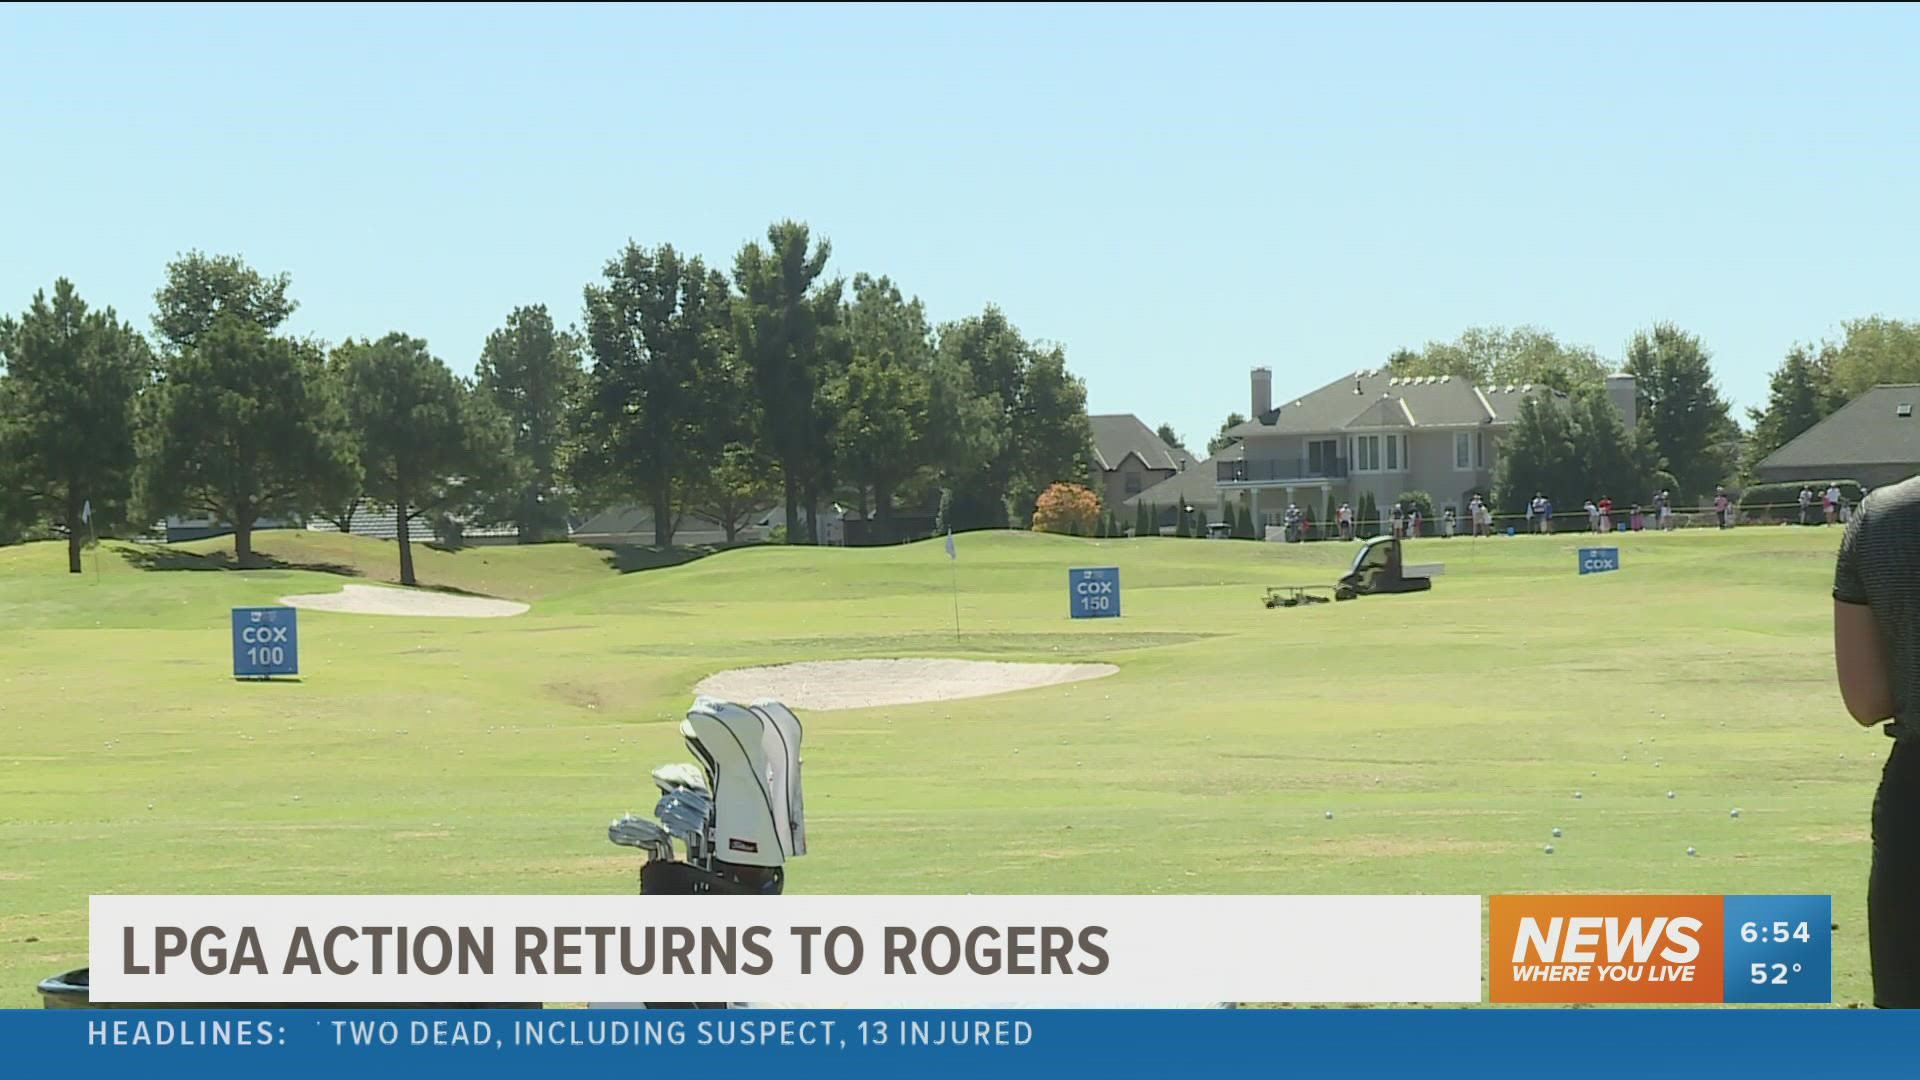 The LPGA tournament has made it back to Northwest Arkansas for the 15th year.